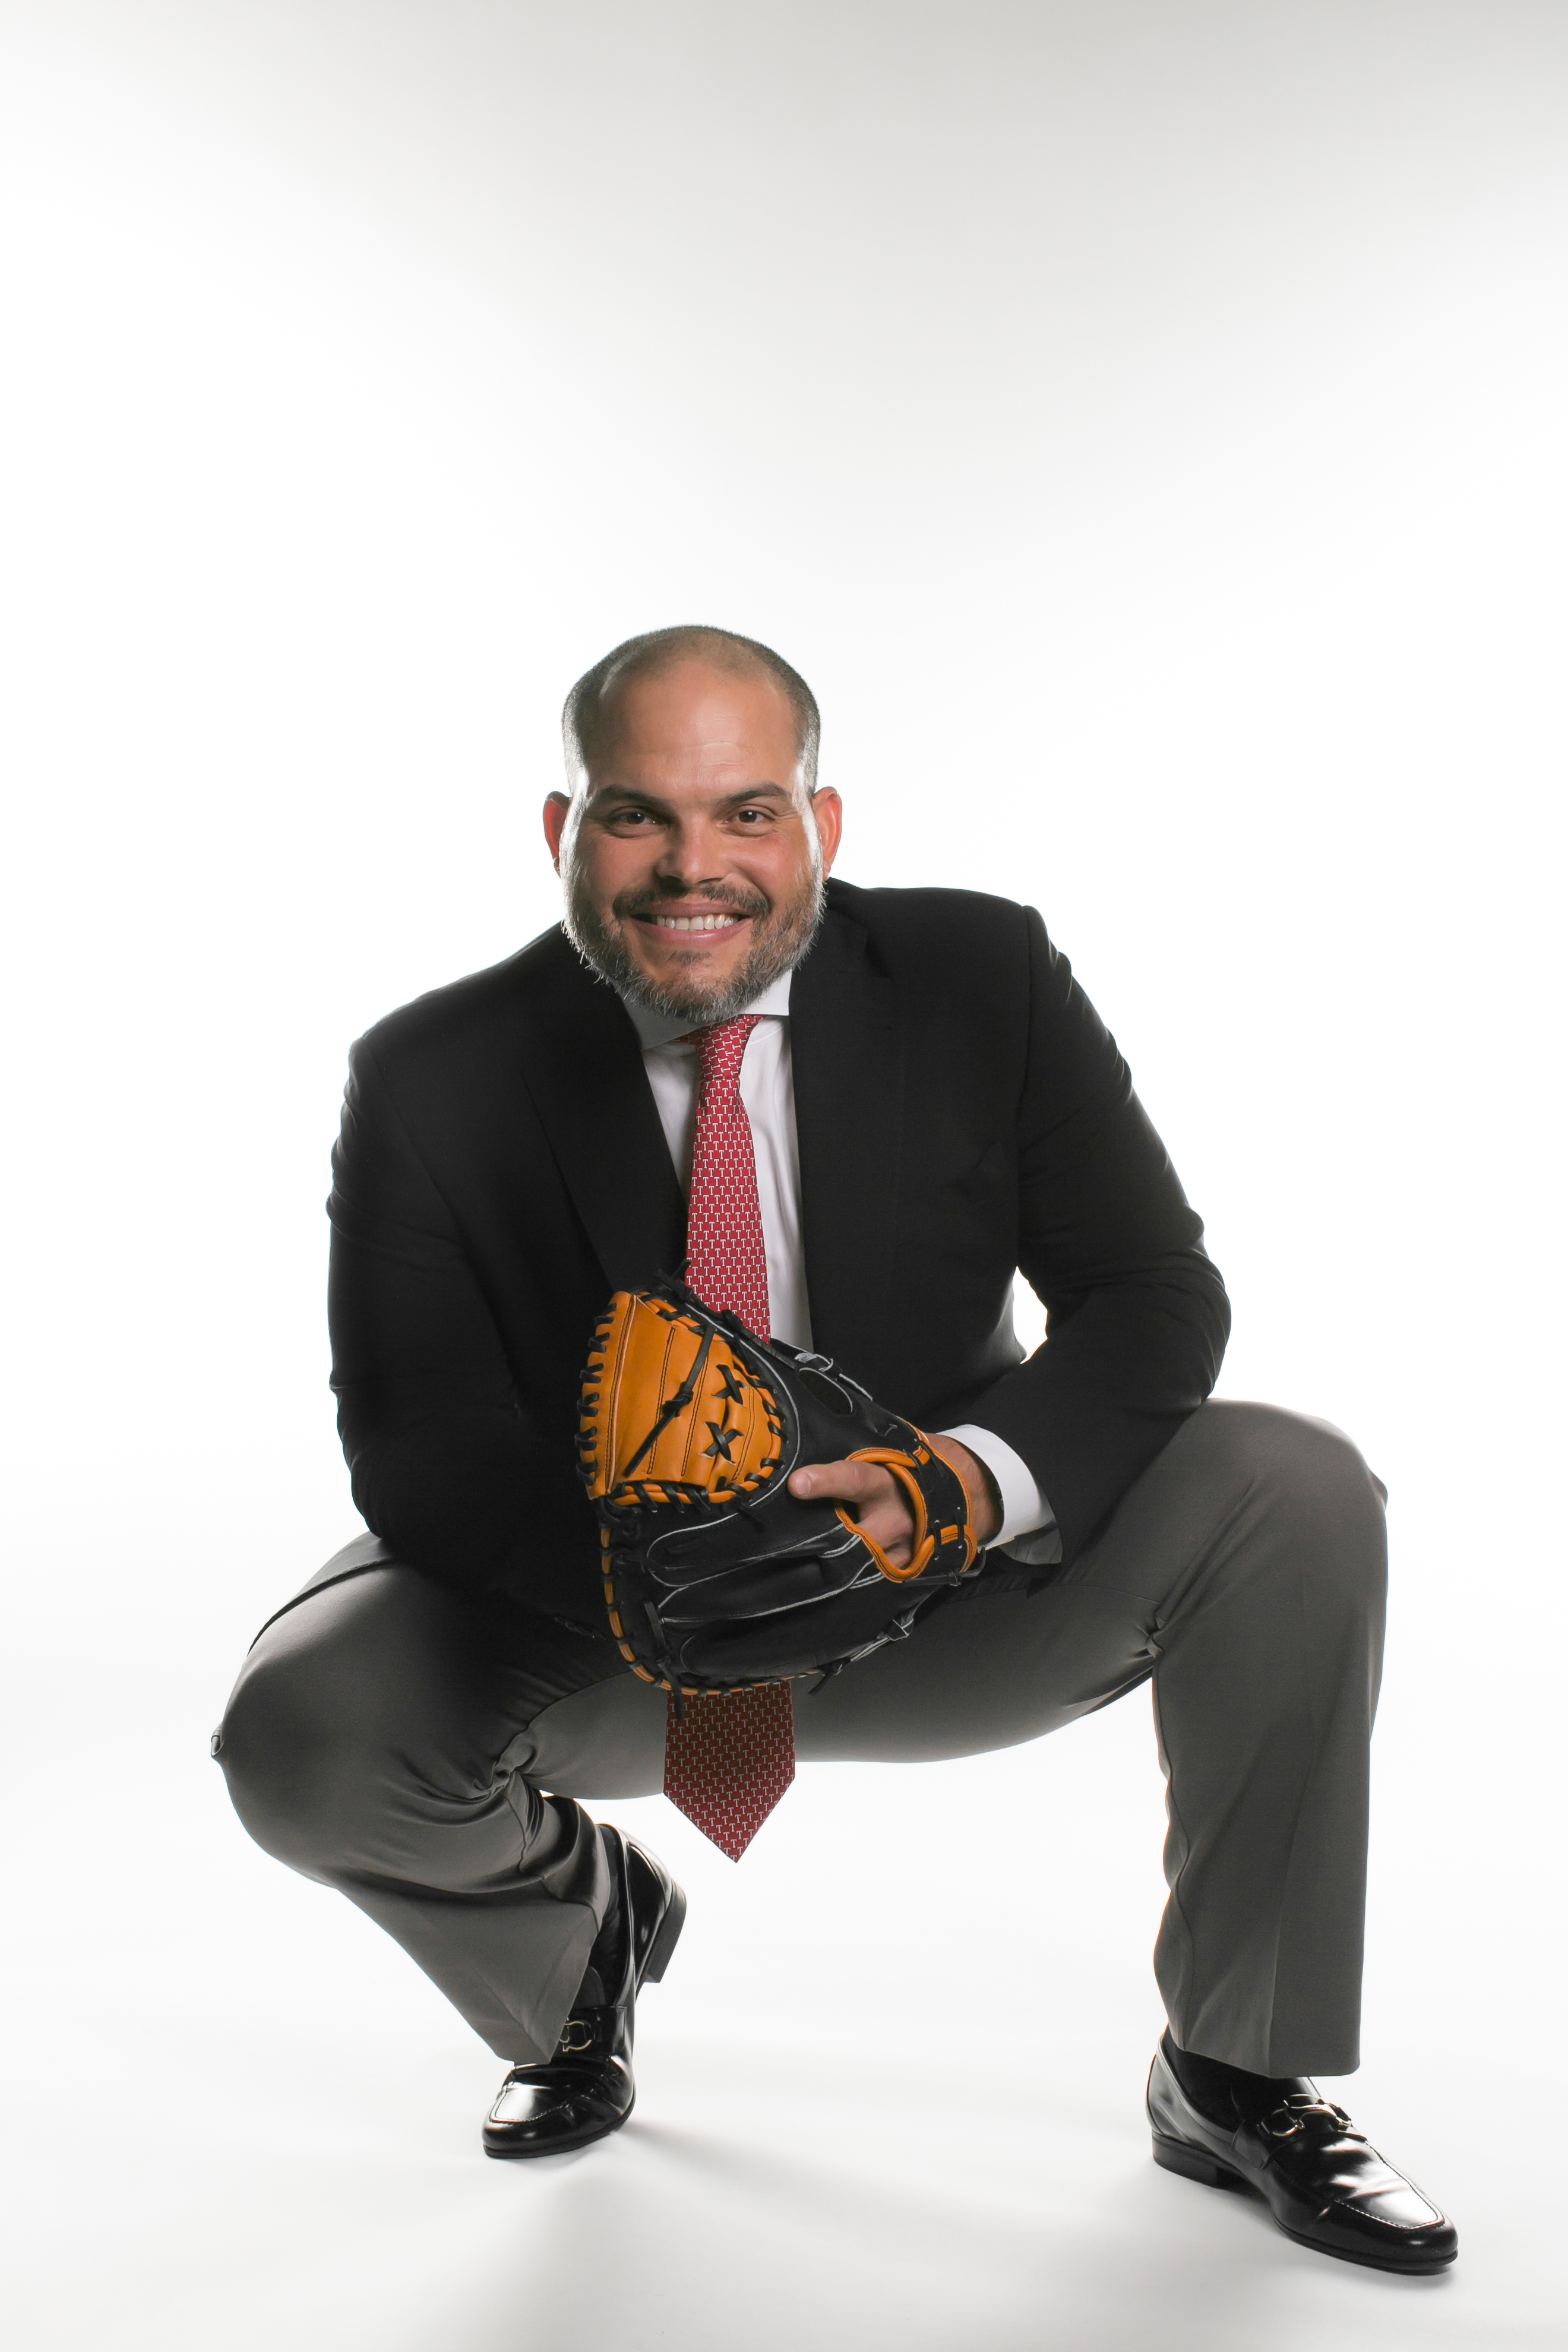 z9 Capital and Baseball Legend Ivan “Pudge” Rodriguez Team Up For